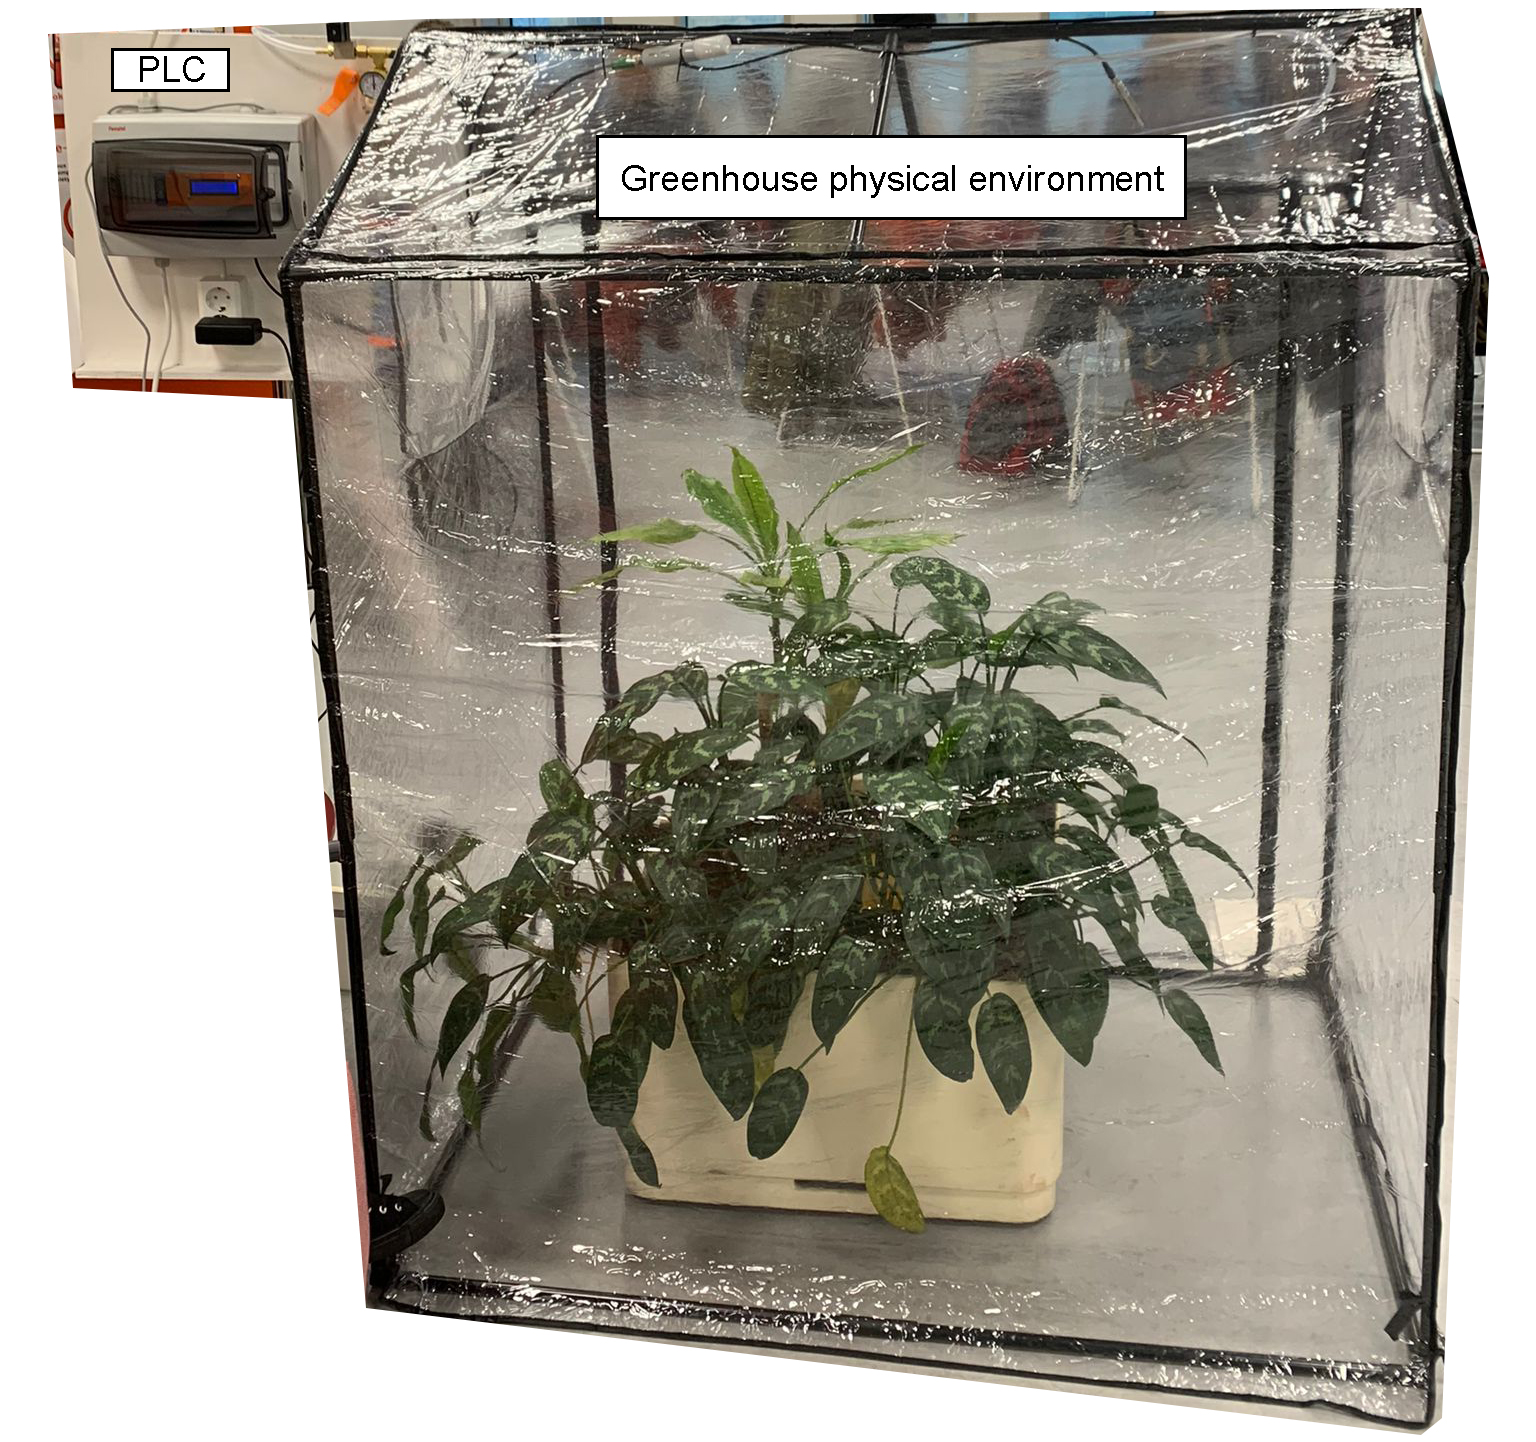 Physical Greenhouse